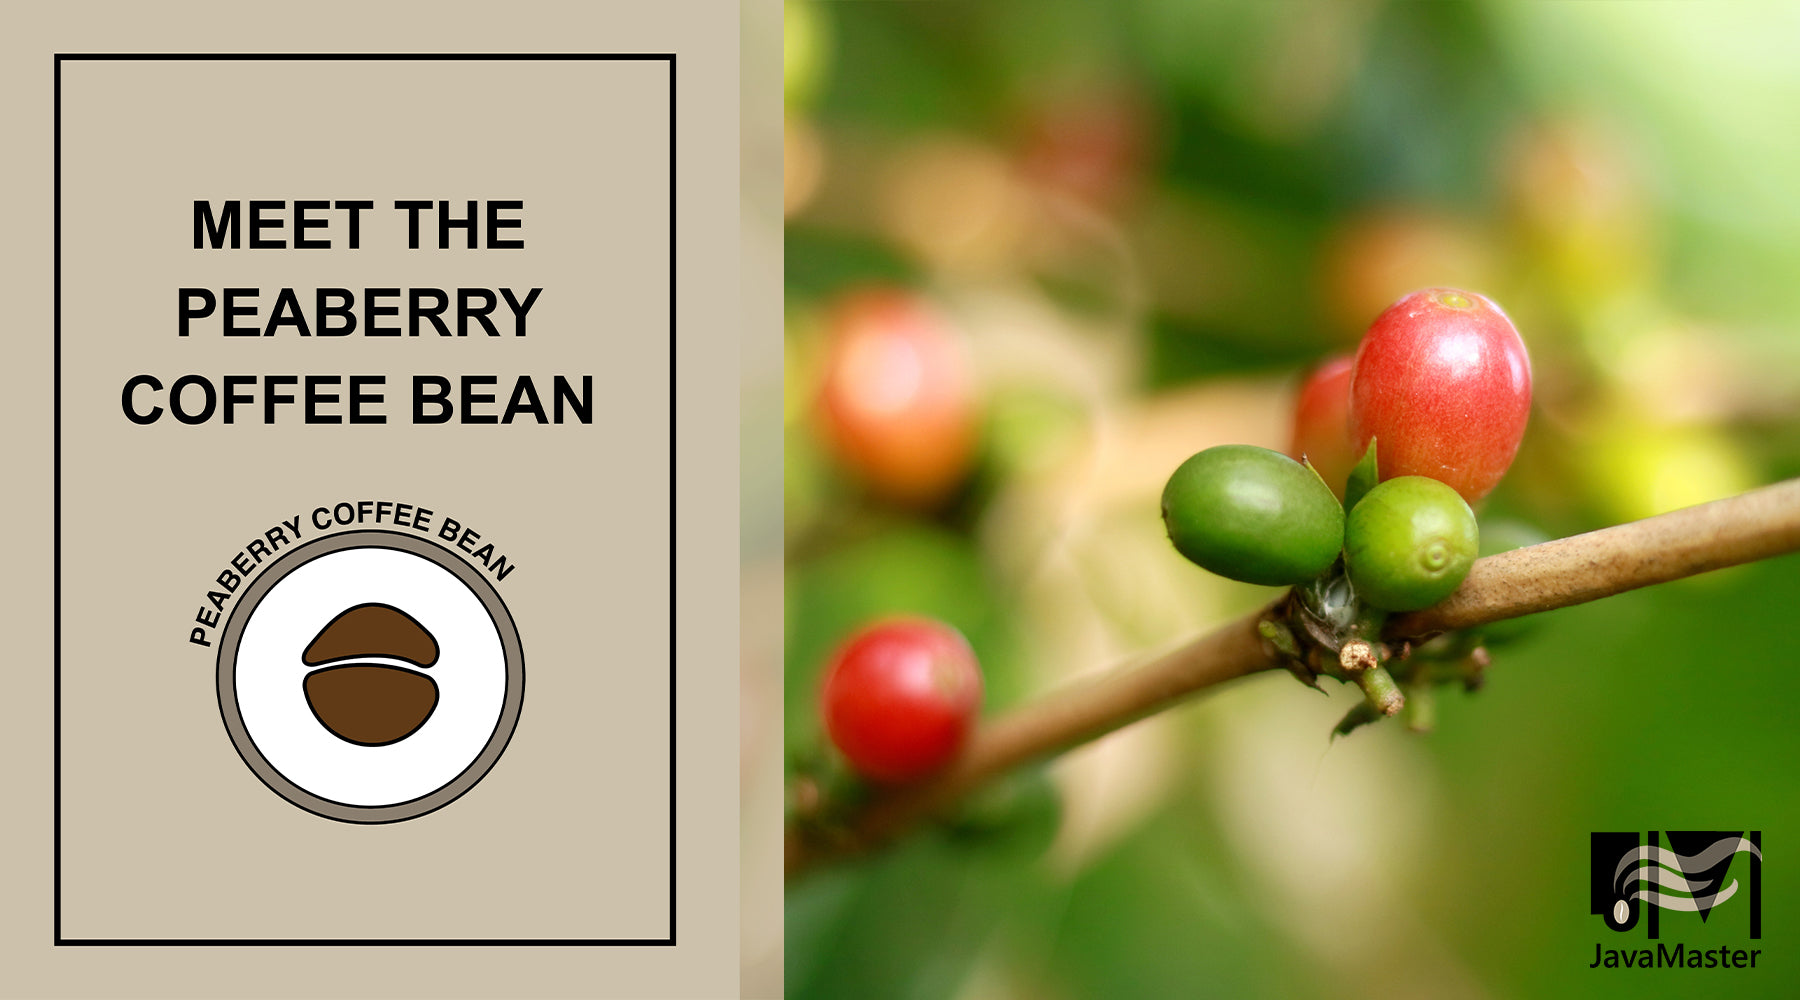 What Are Peaberry Coffee Beans?